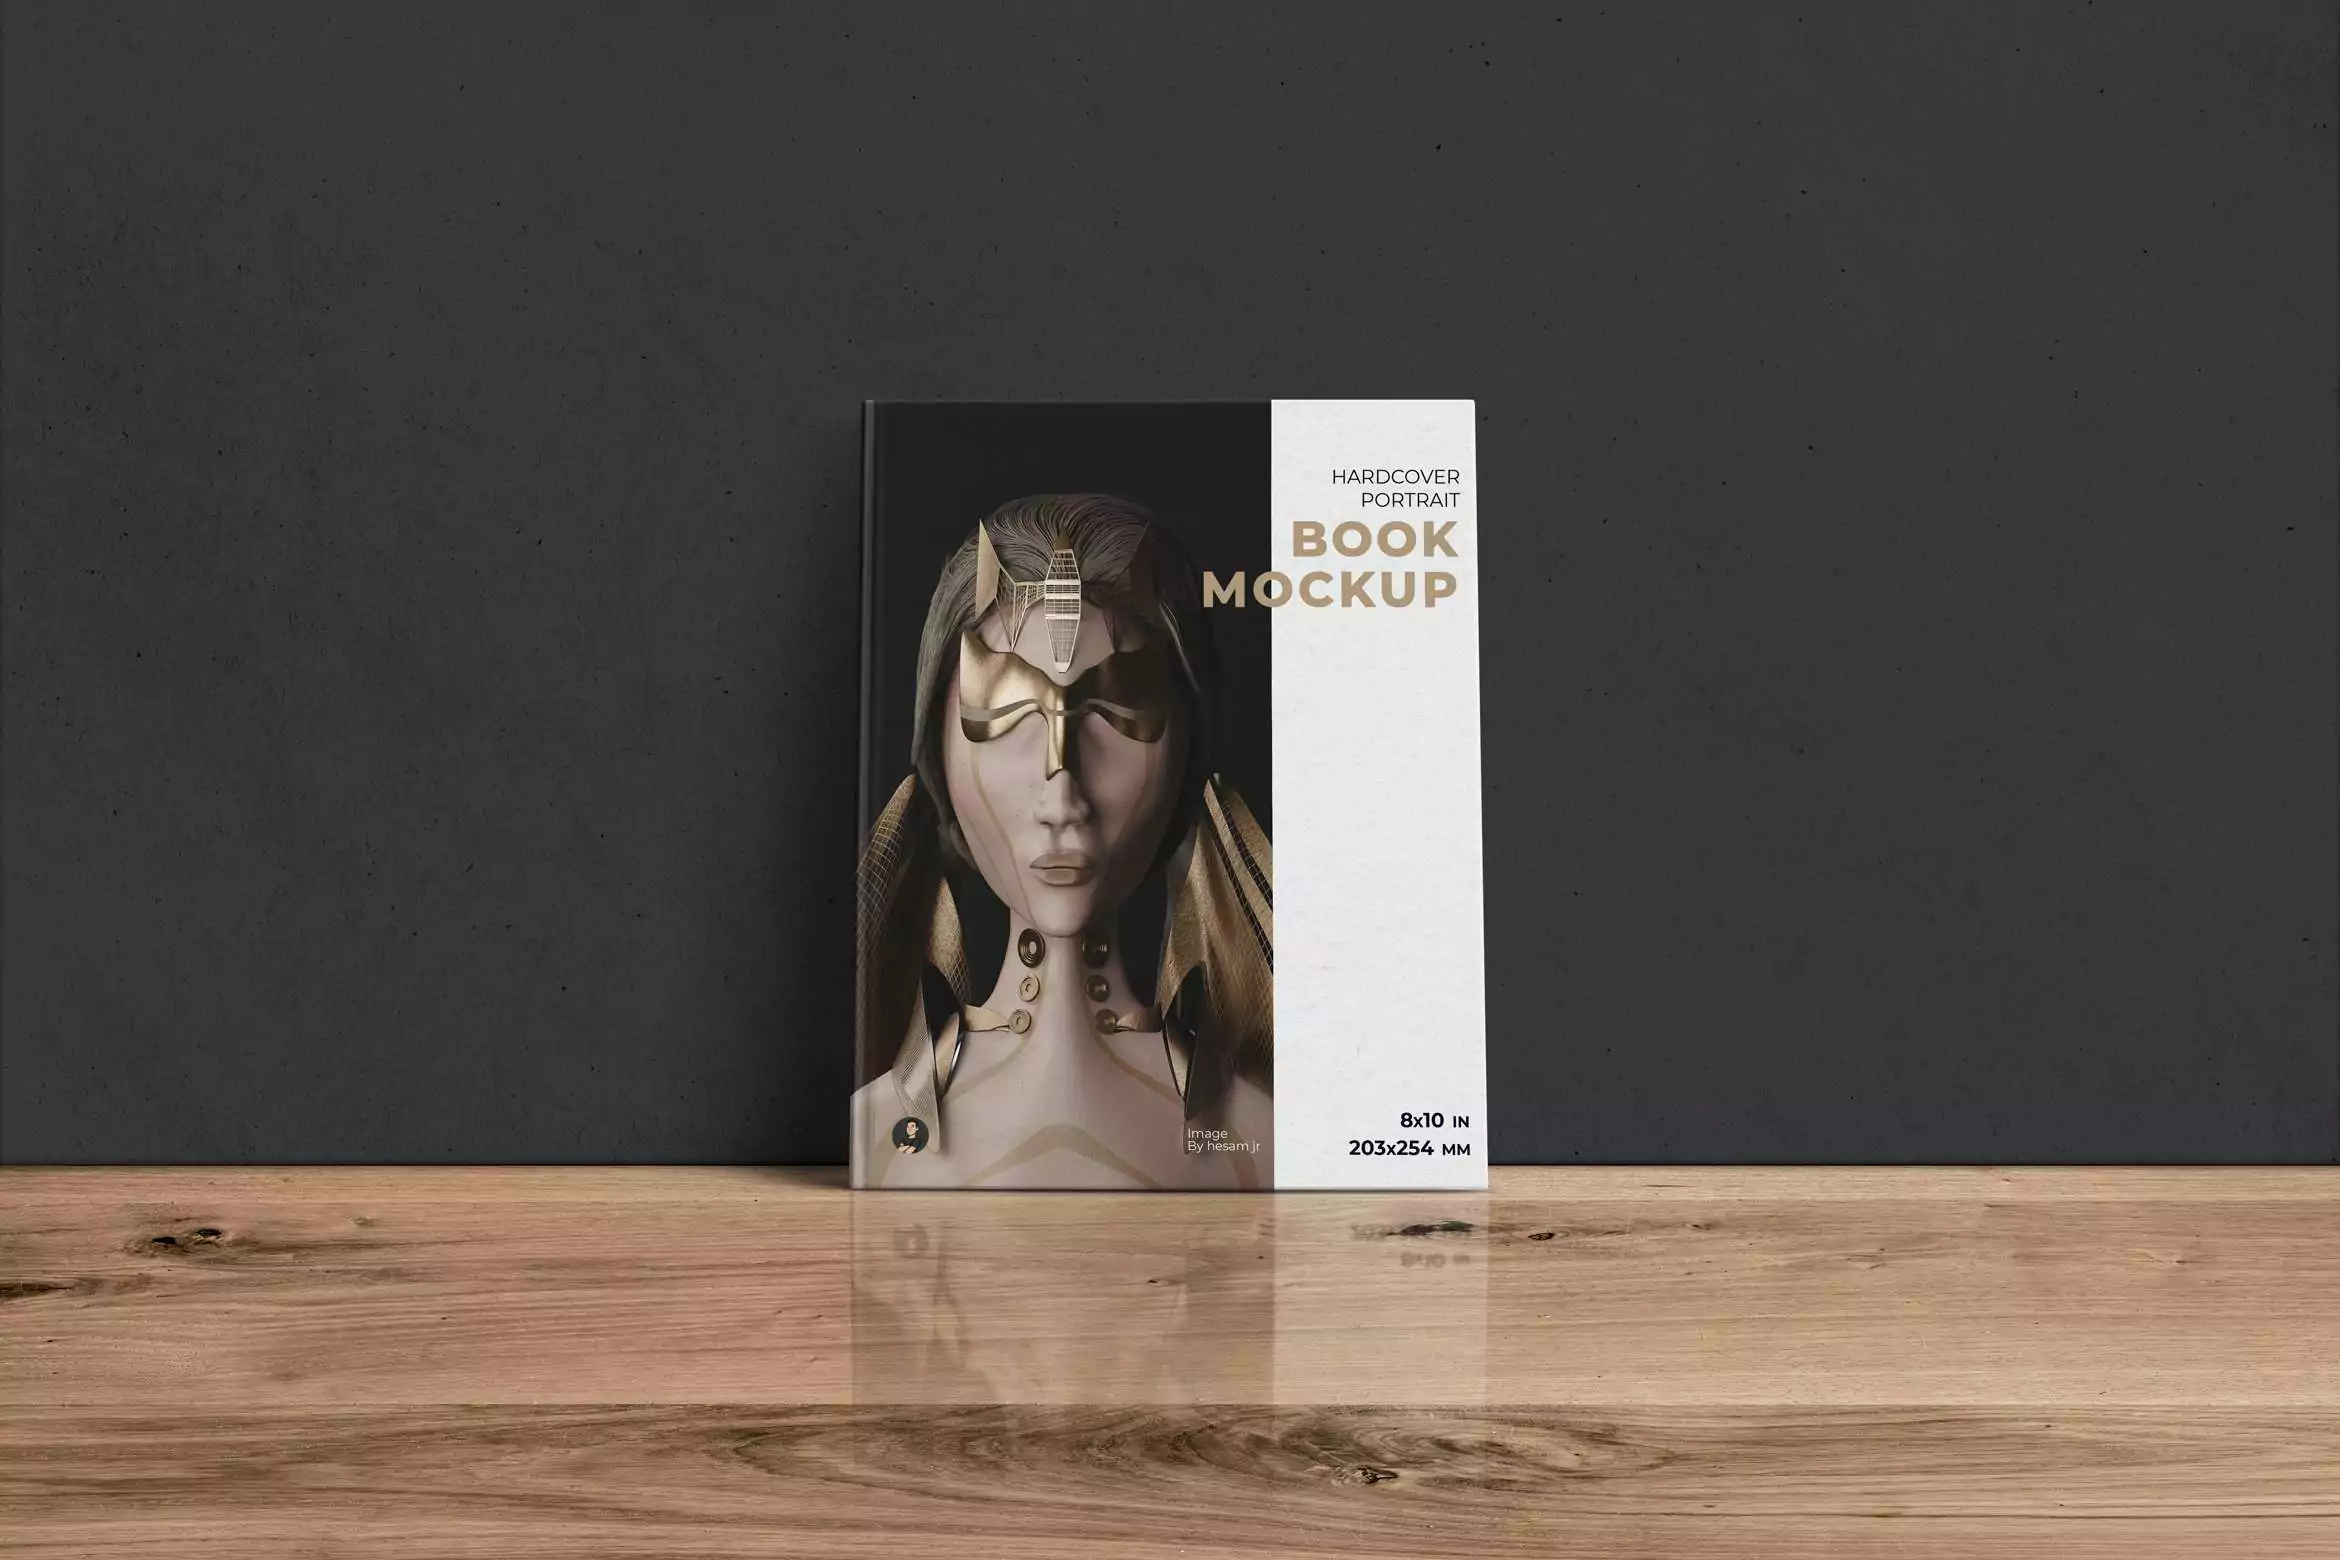 Leaning on Wall Portrait Book Mockup - 8x10 in